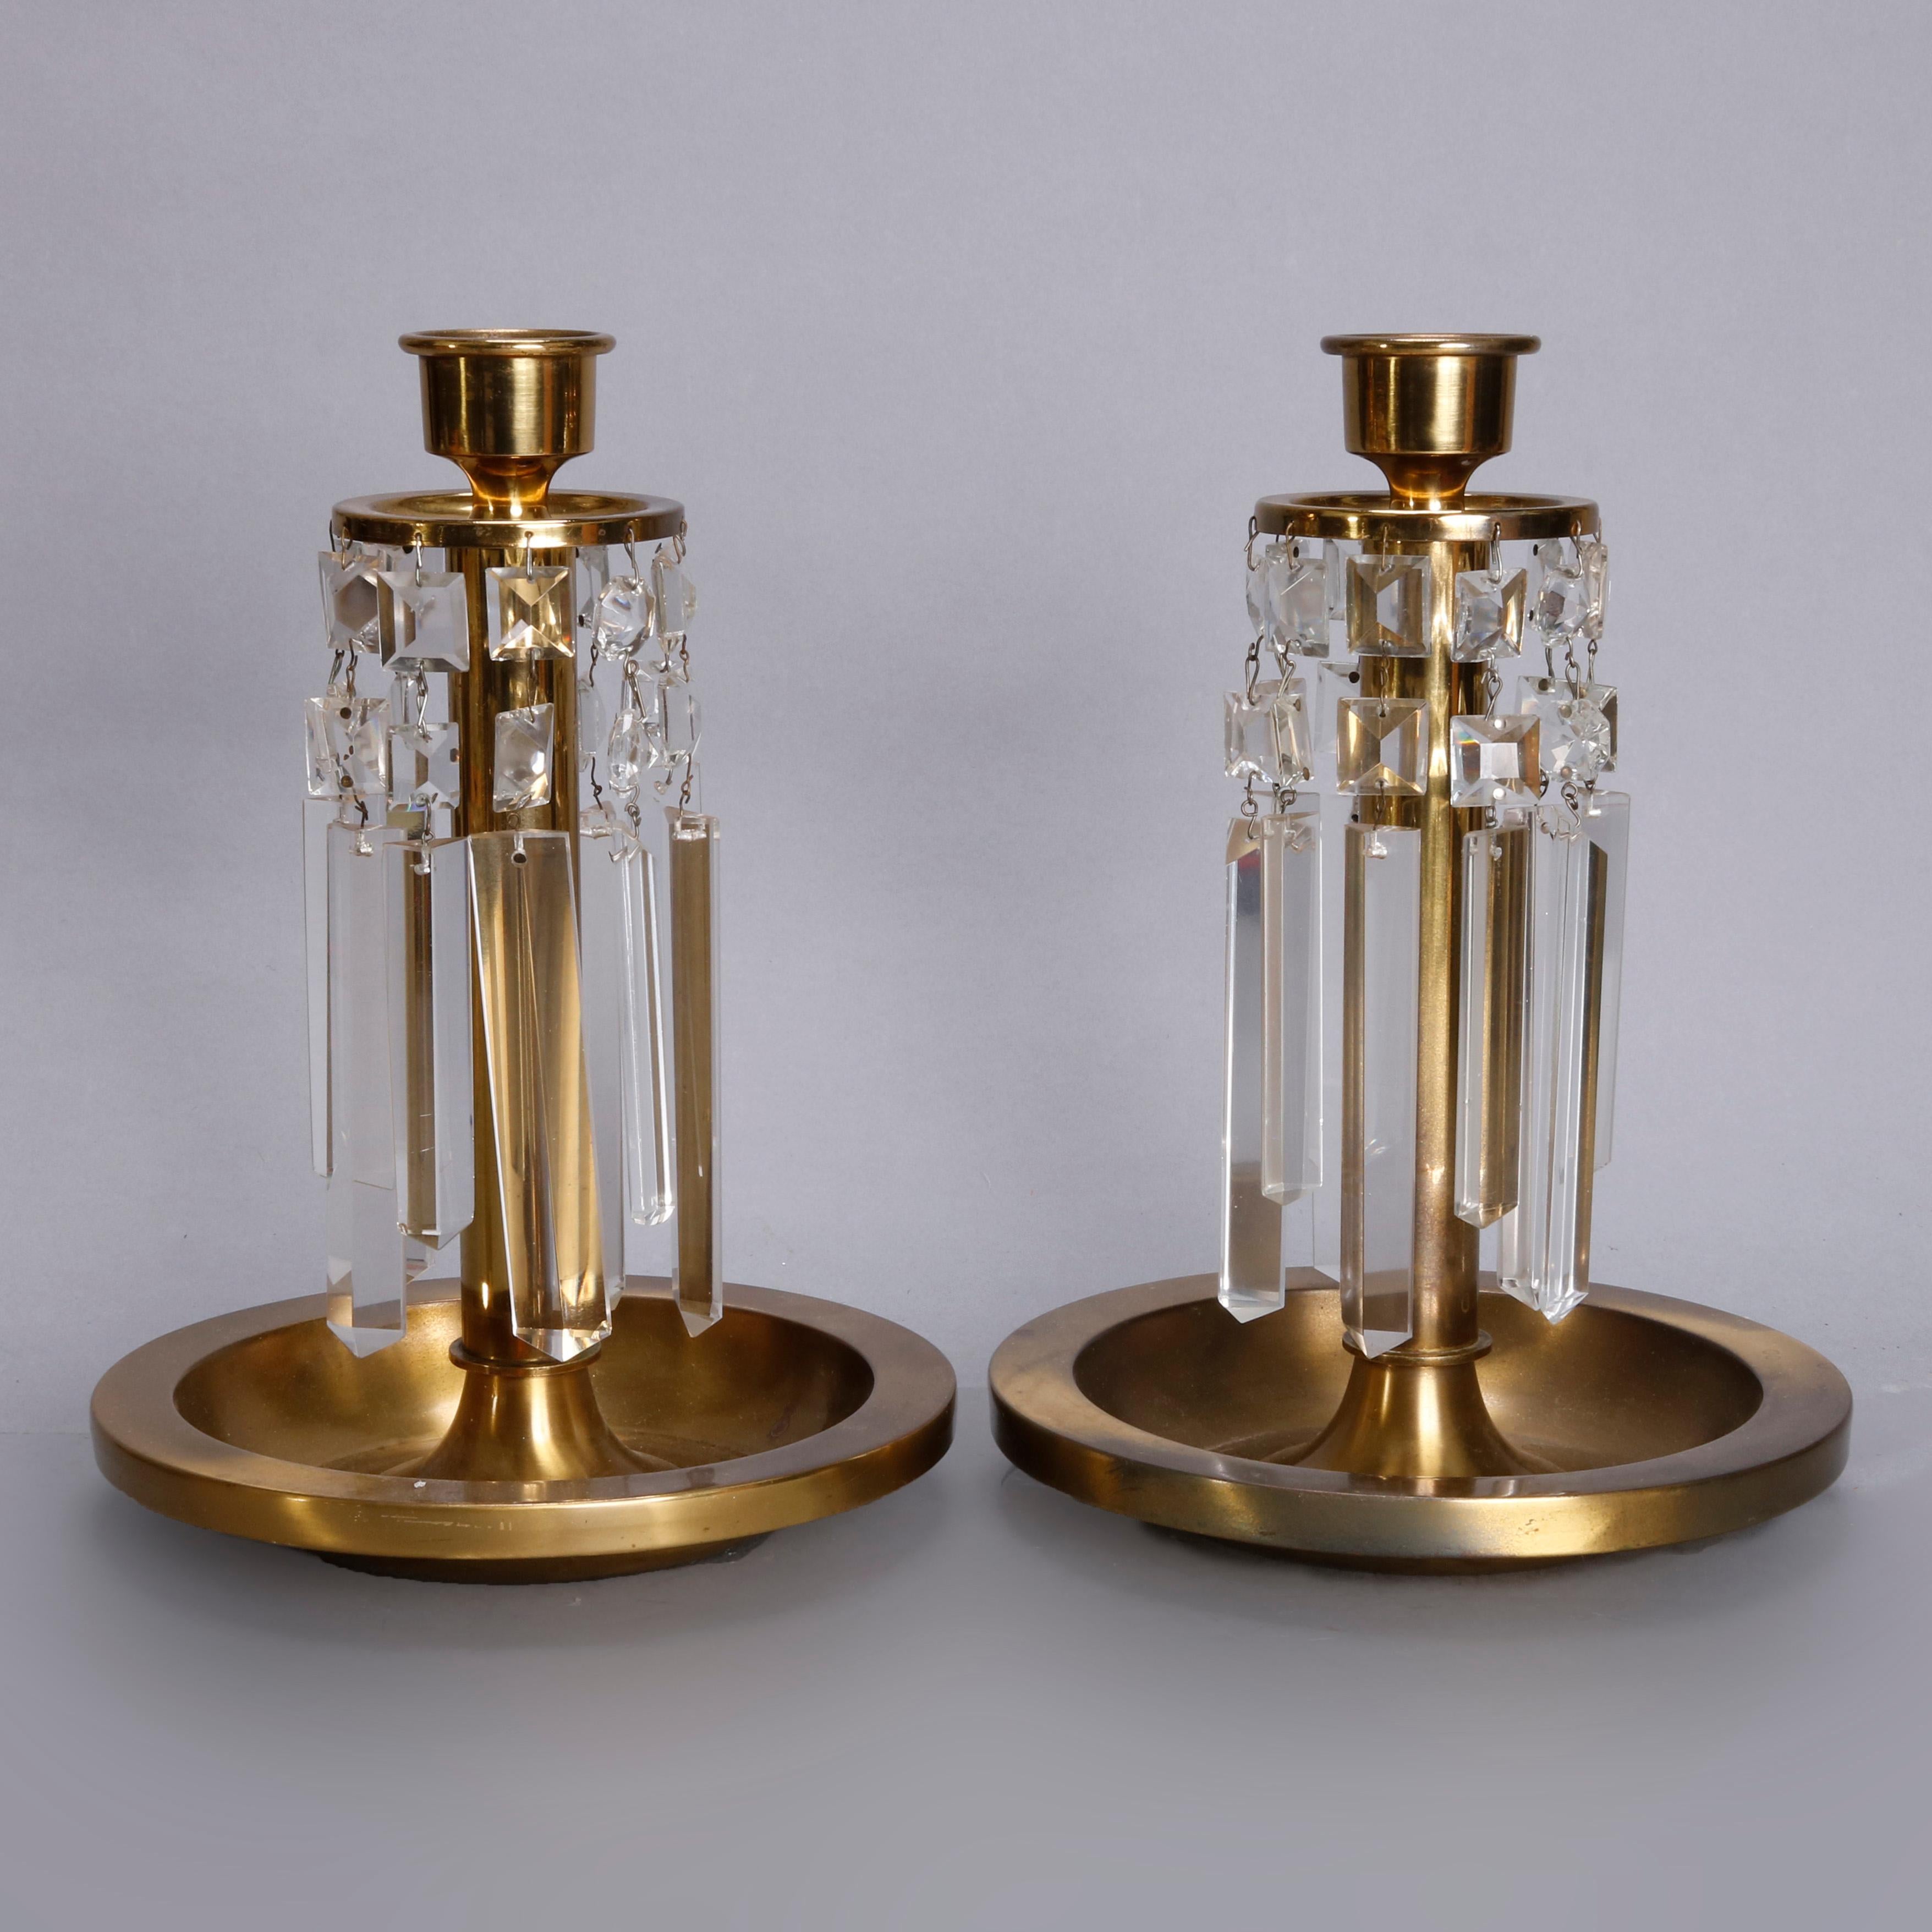 A pair of Arts & Crafts candlesticks each offer brass column form with a round base having a well and single candle socket with cut crystals, circa 1910

 Measures: 11.5